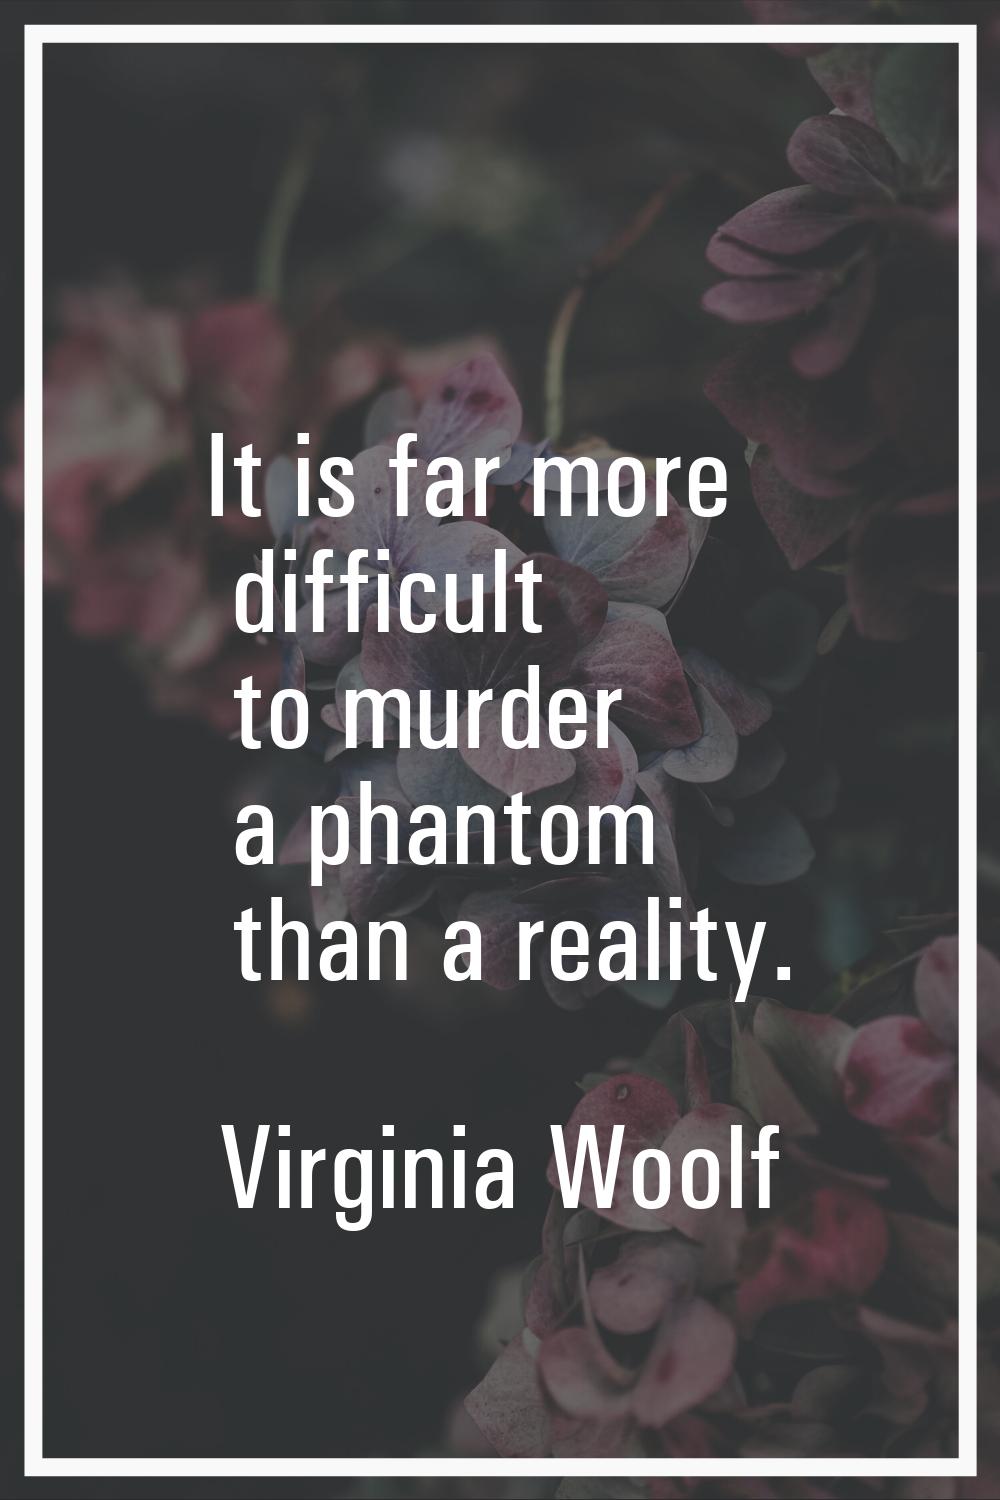 It is far more difficult to murder a phantom than a reality.